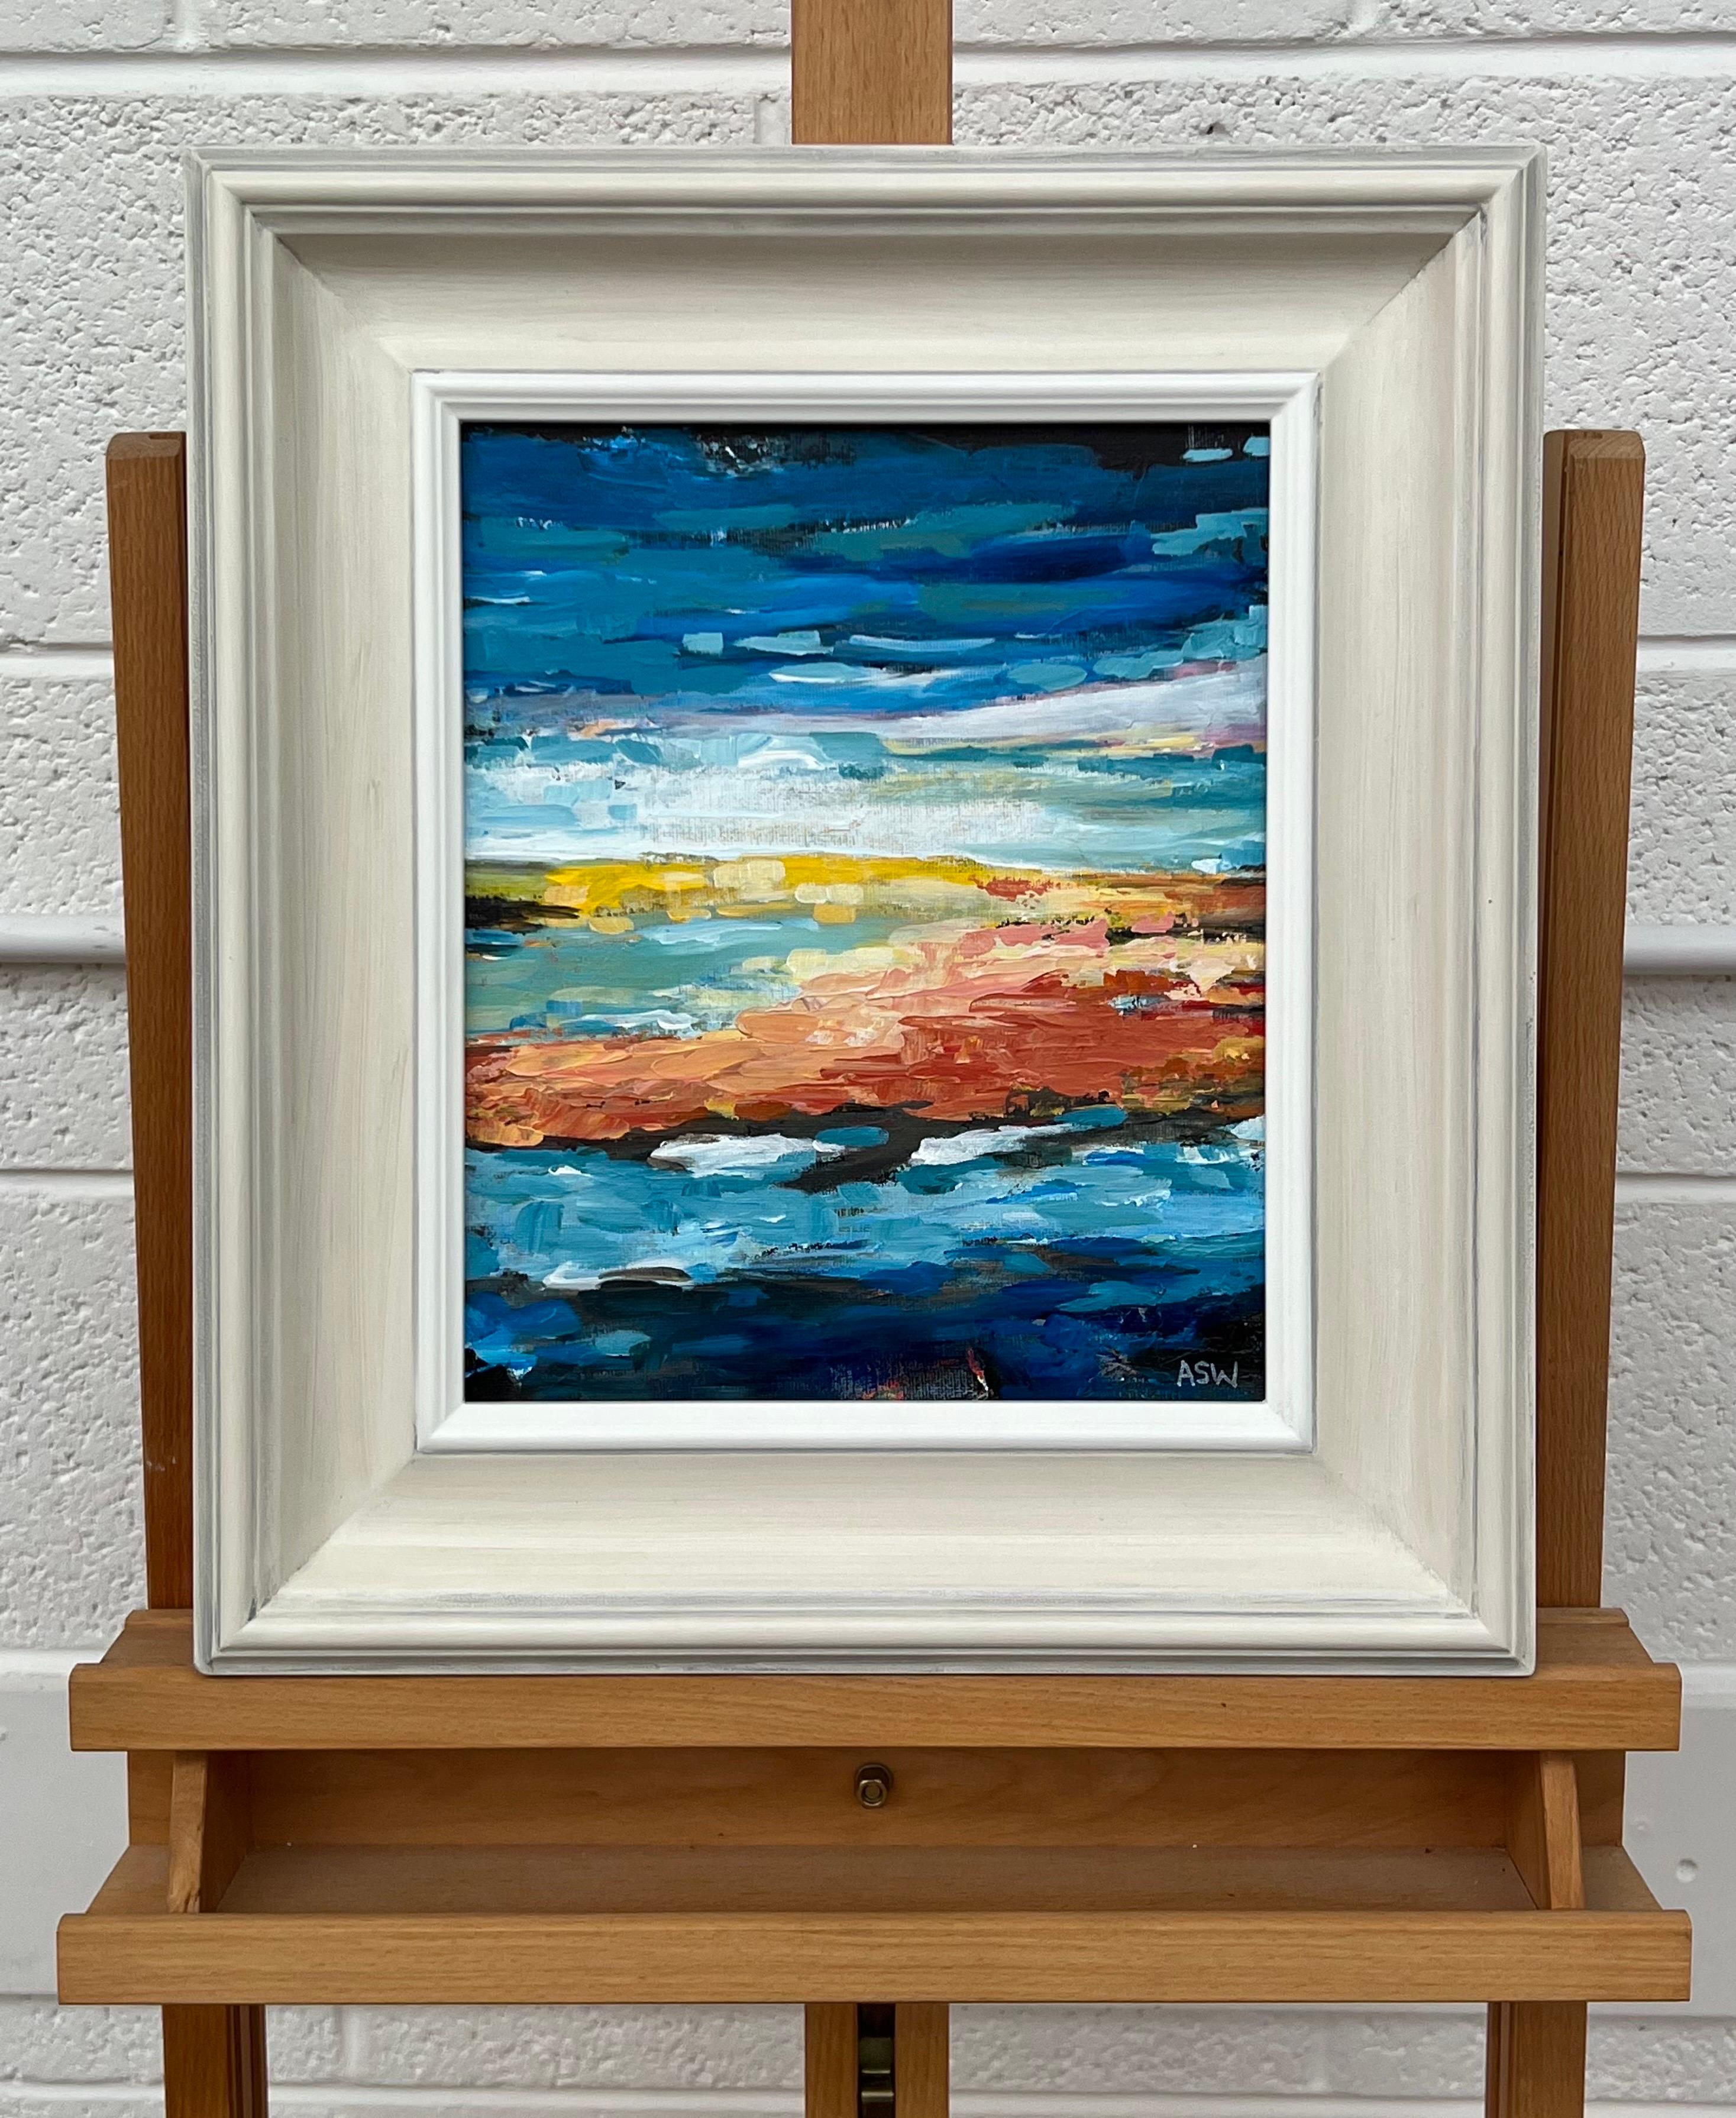 Blue & Yellow Abstract Impressionist Seascape Landscape by Contemporary Artist For Sale 2